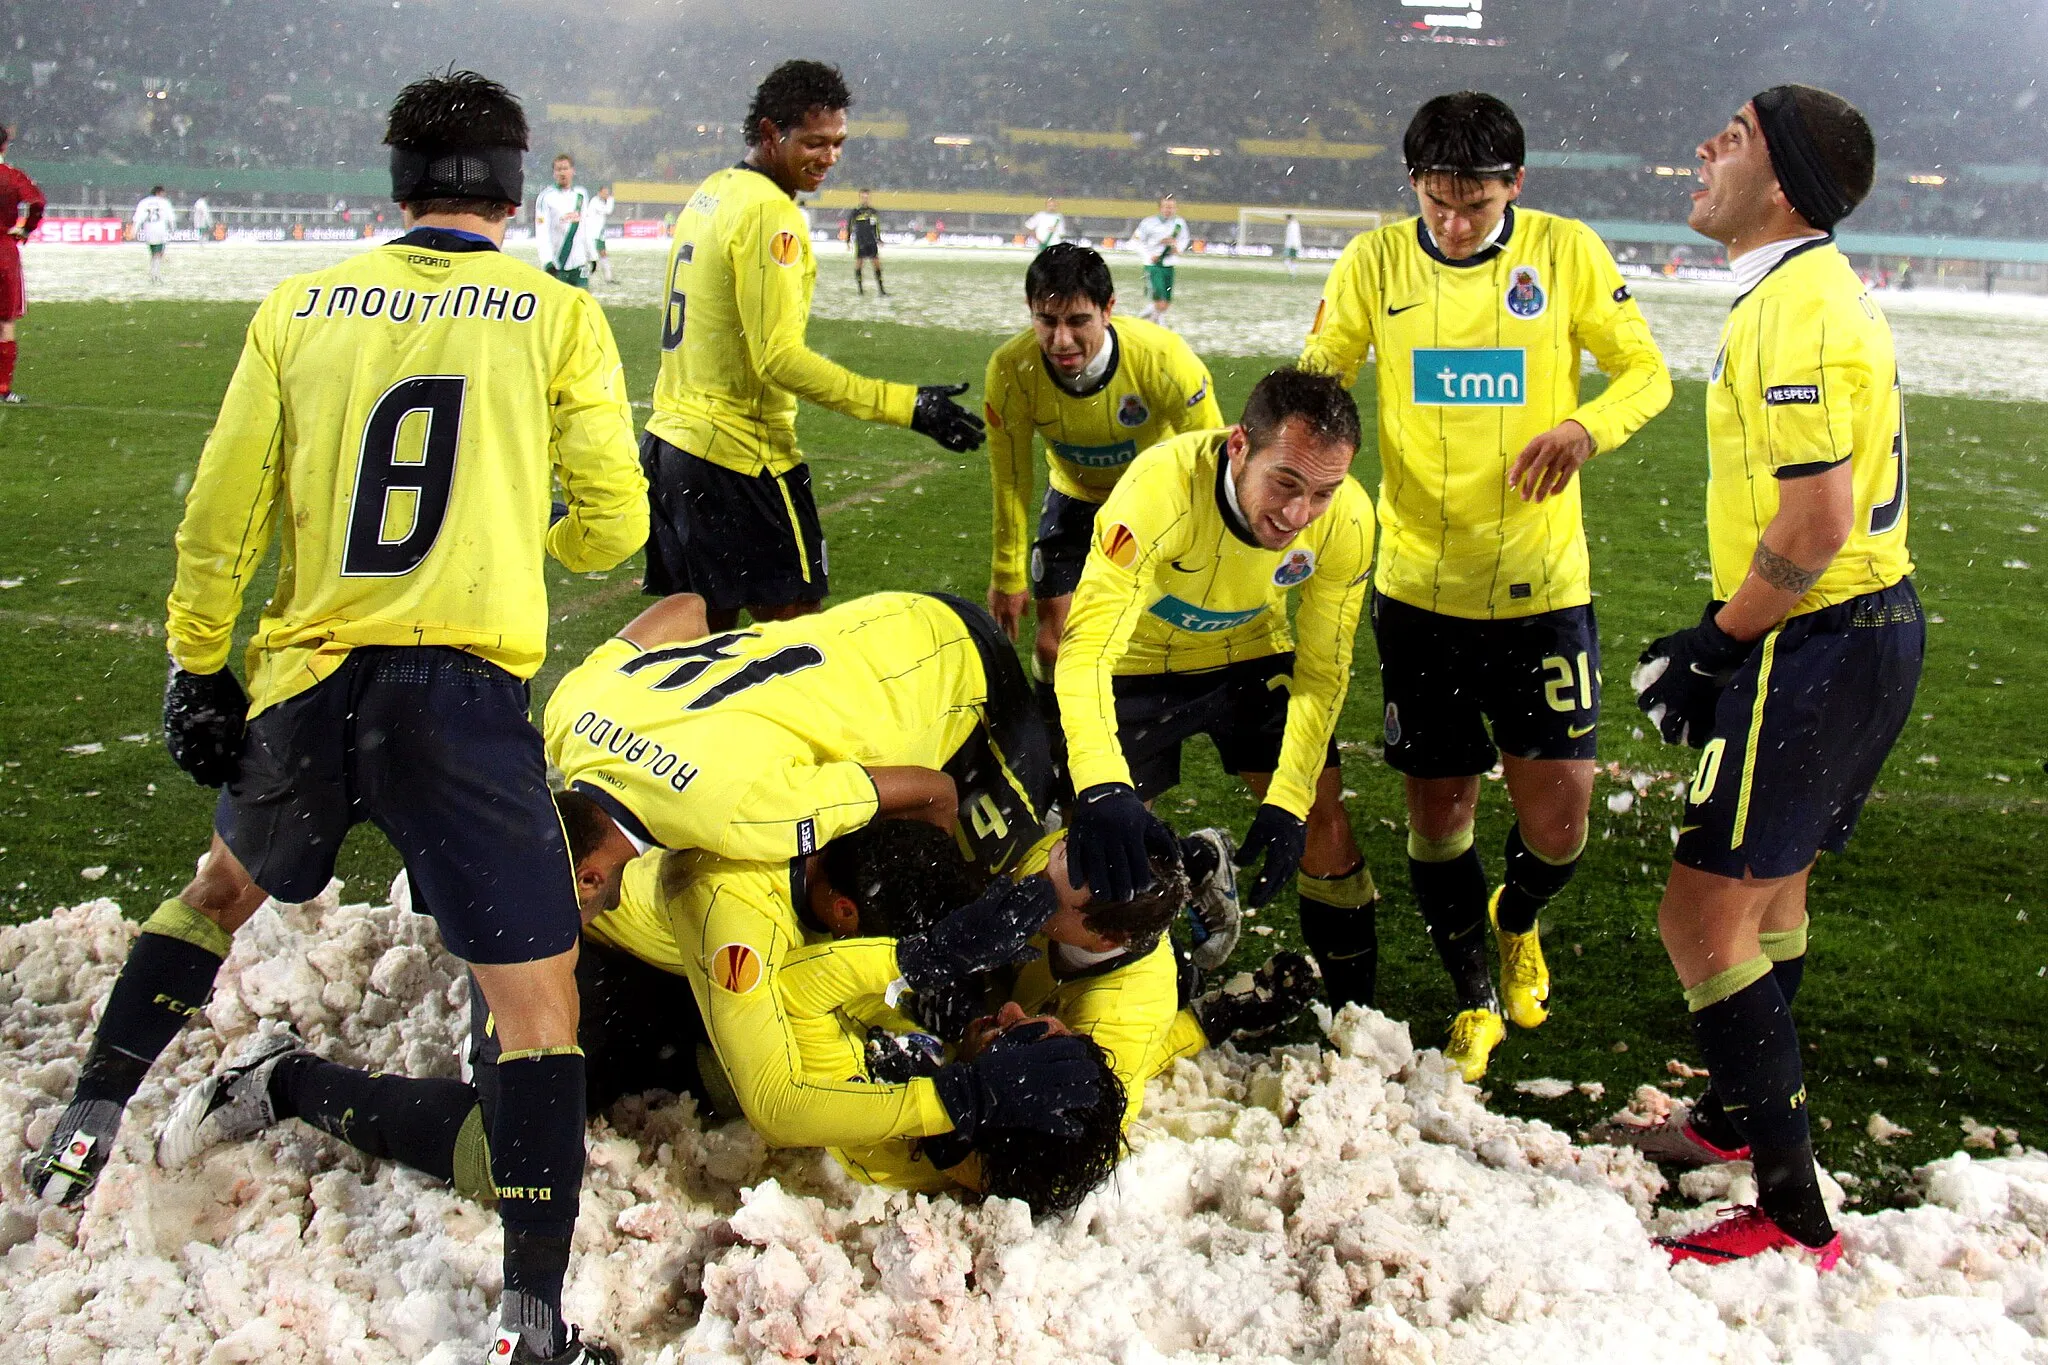 Photo showing: 2010–11 UEFA Europa League - SK Rapid Wien vs. F.C. Porto 1:3, Ernst-Happel-Stadion (Vienna) – Radamel Falcao (#9) scored his 3rd goal. Portos players are jubilant in the snow unusual for it.